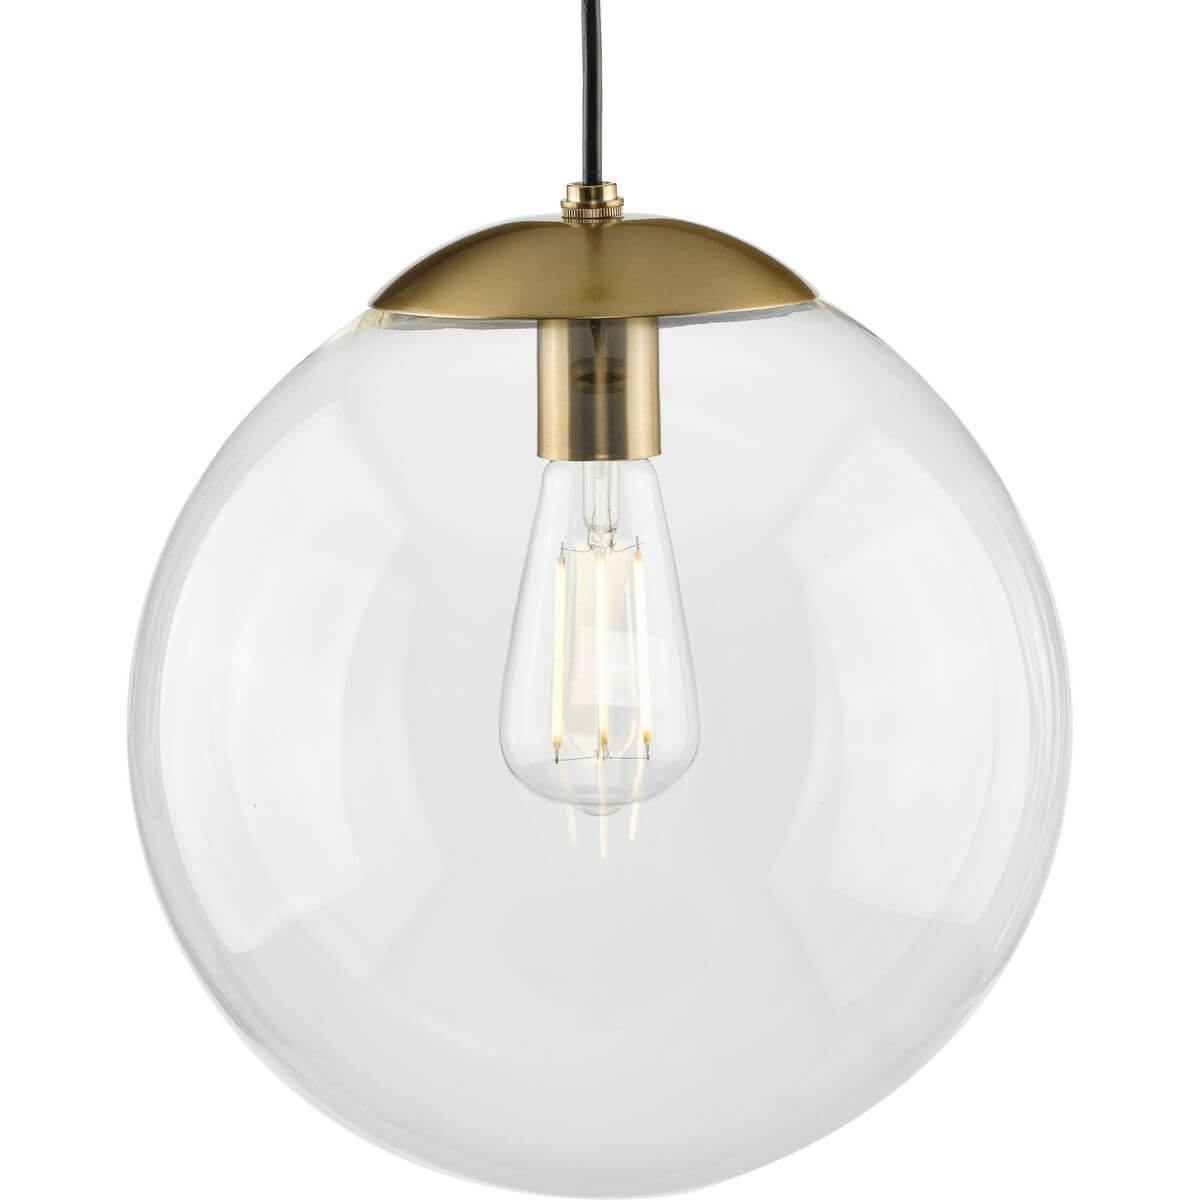 Progress Lighting Atwell 1 Light 12 inch Pendant in Brushed Bronze with Clear Glass P500311-109